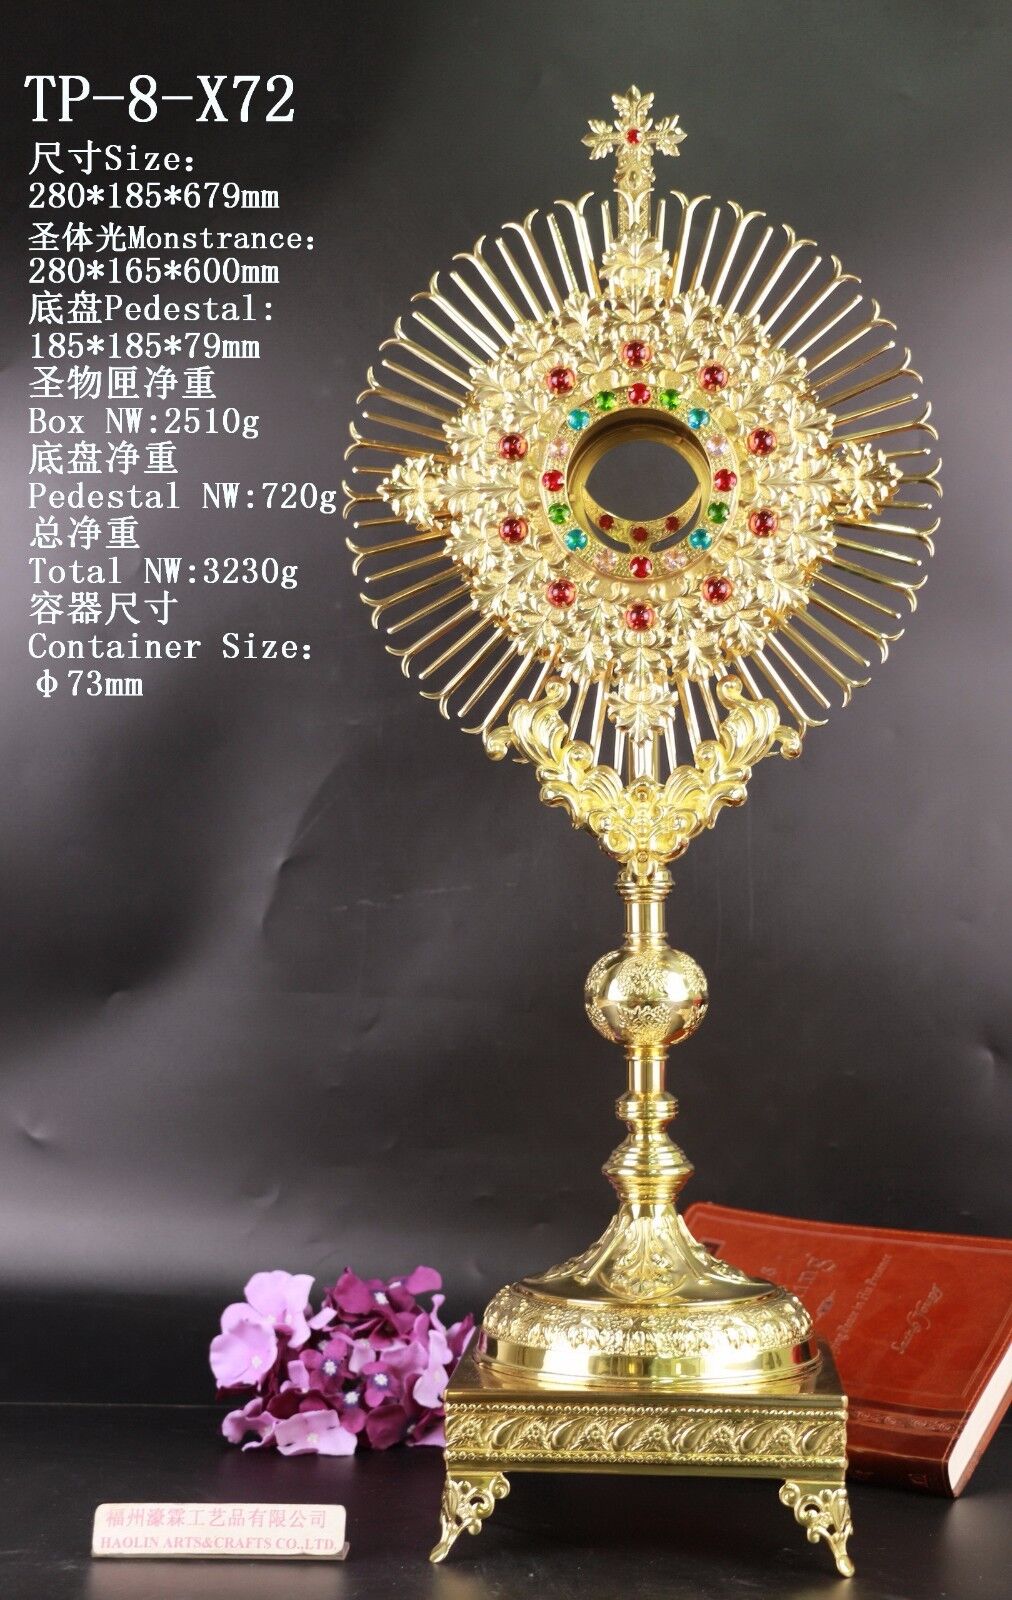 Rare Fine Monstrance Ornate Beautiful with Tabor Pedestal TP-8-X72